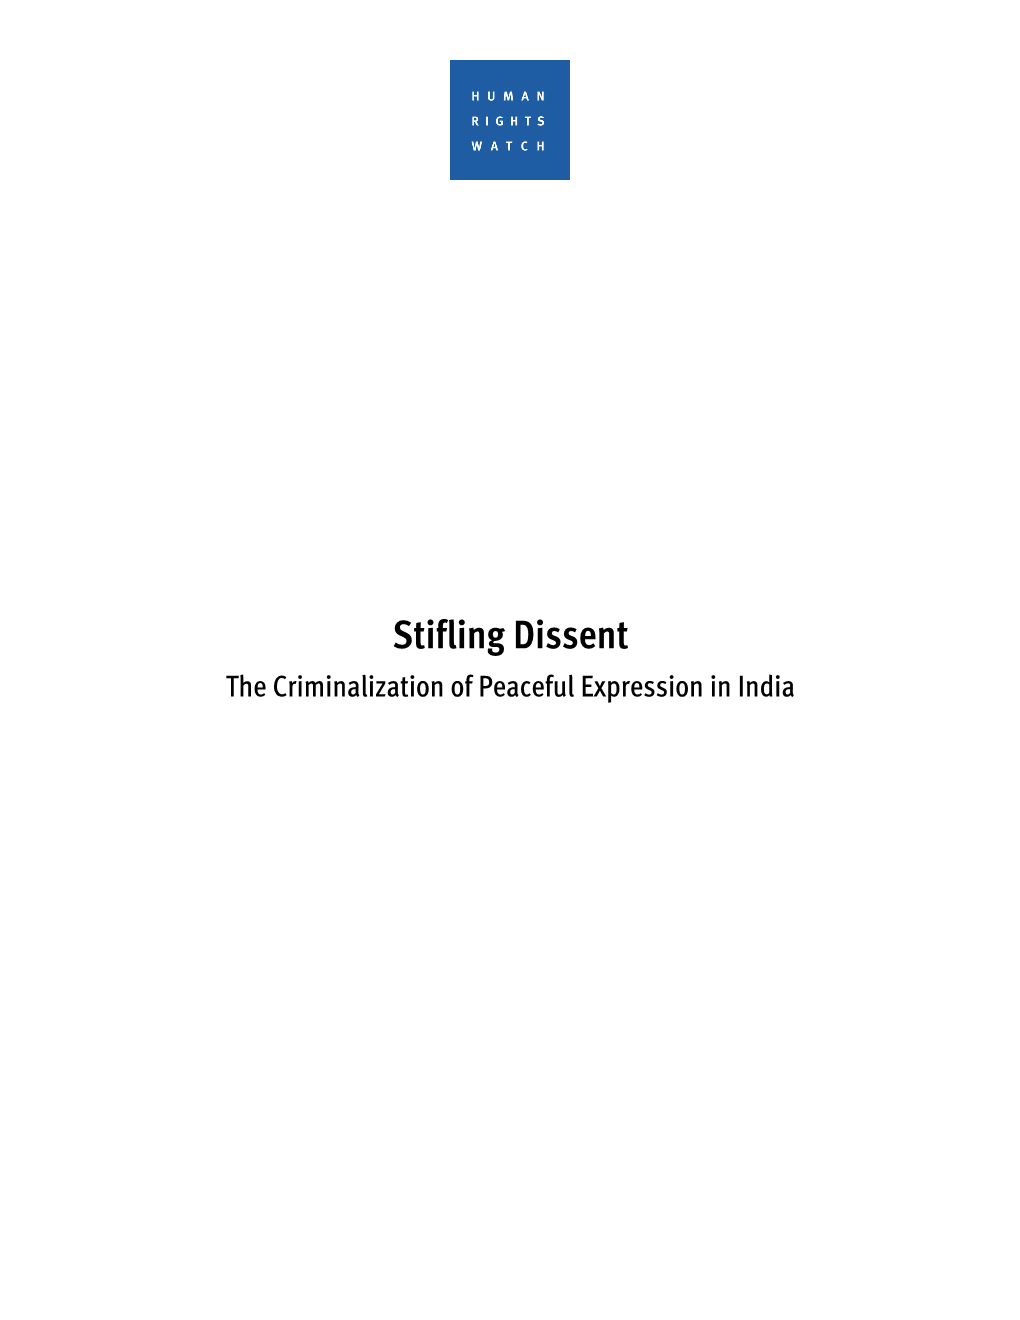 Stifling Dissent the Criminalization of Peaceful Expression in India